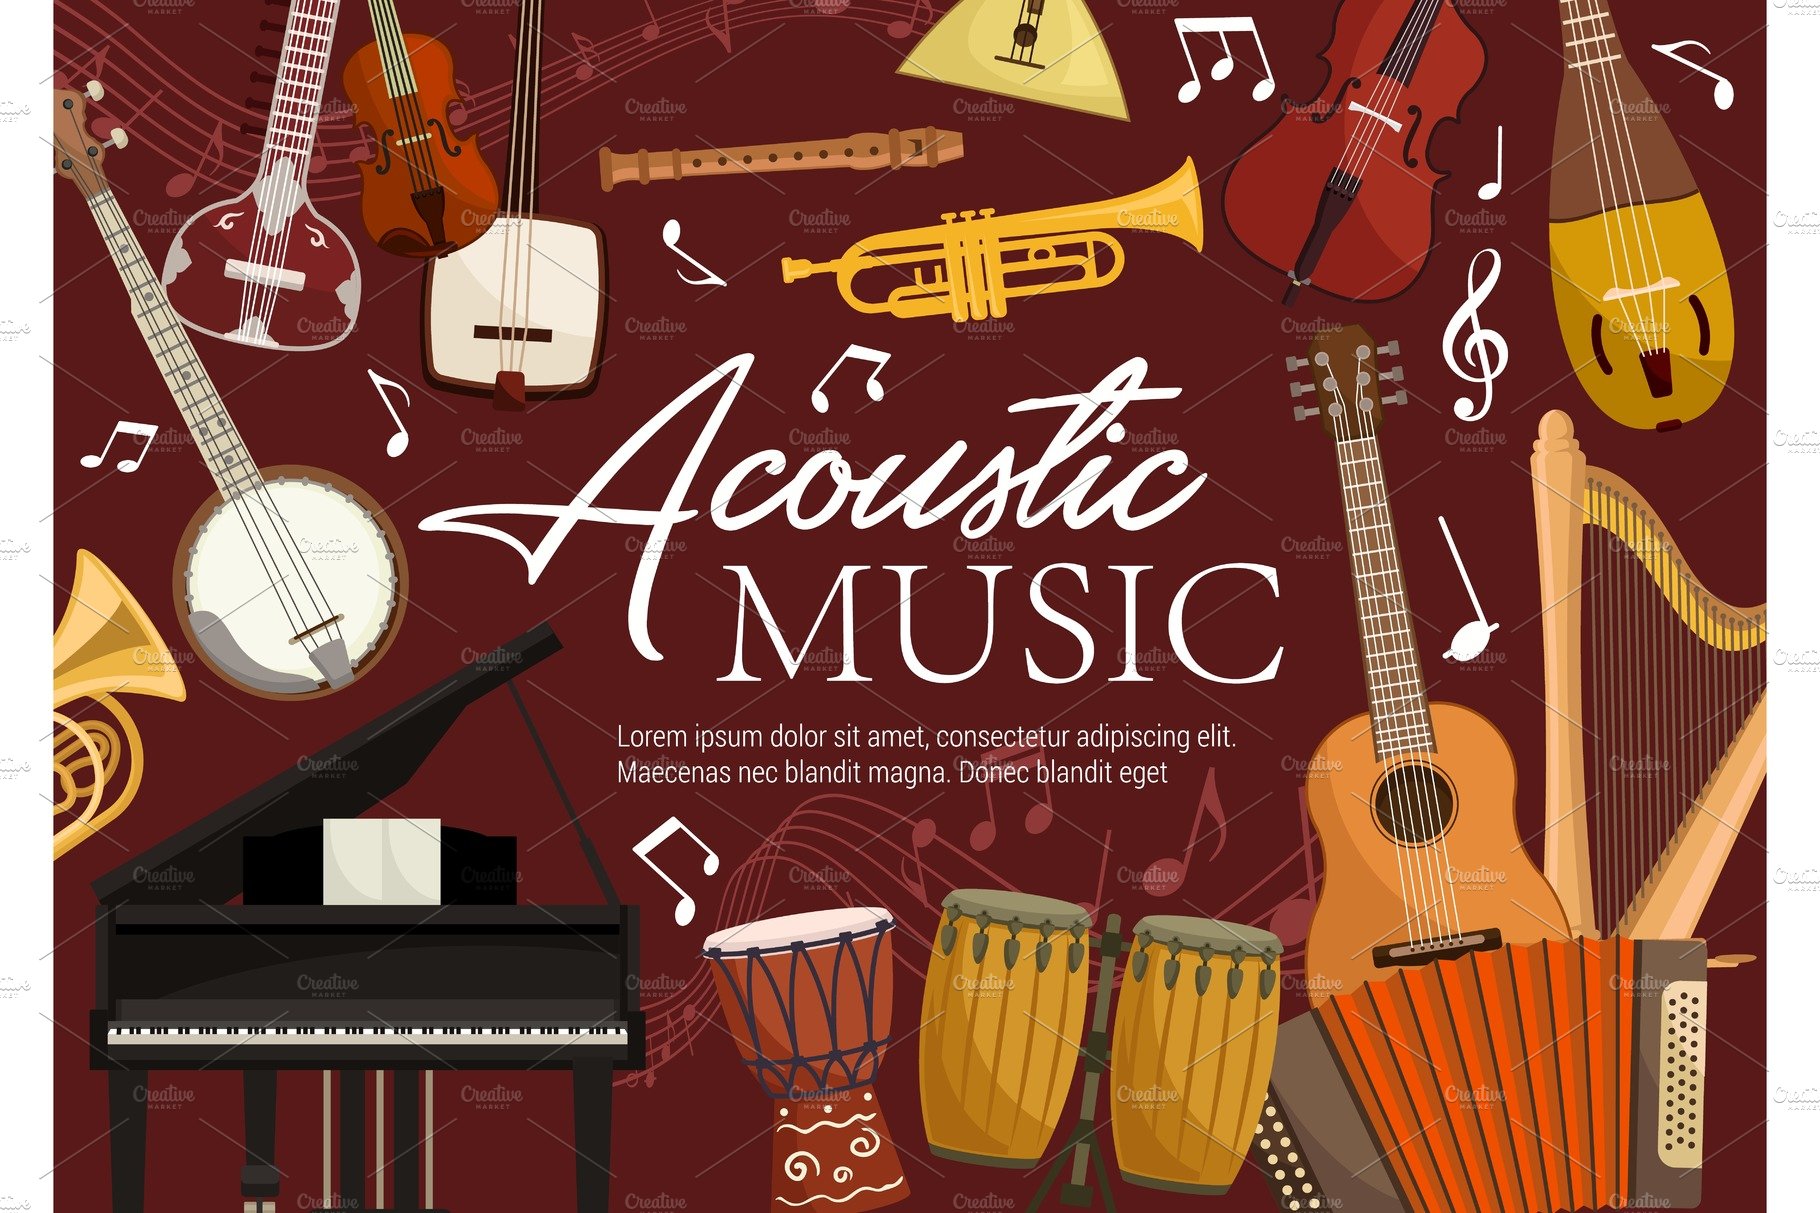 Retro musical instruments cover image.